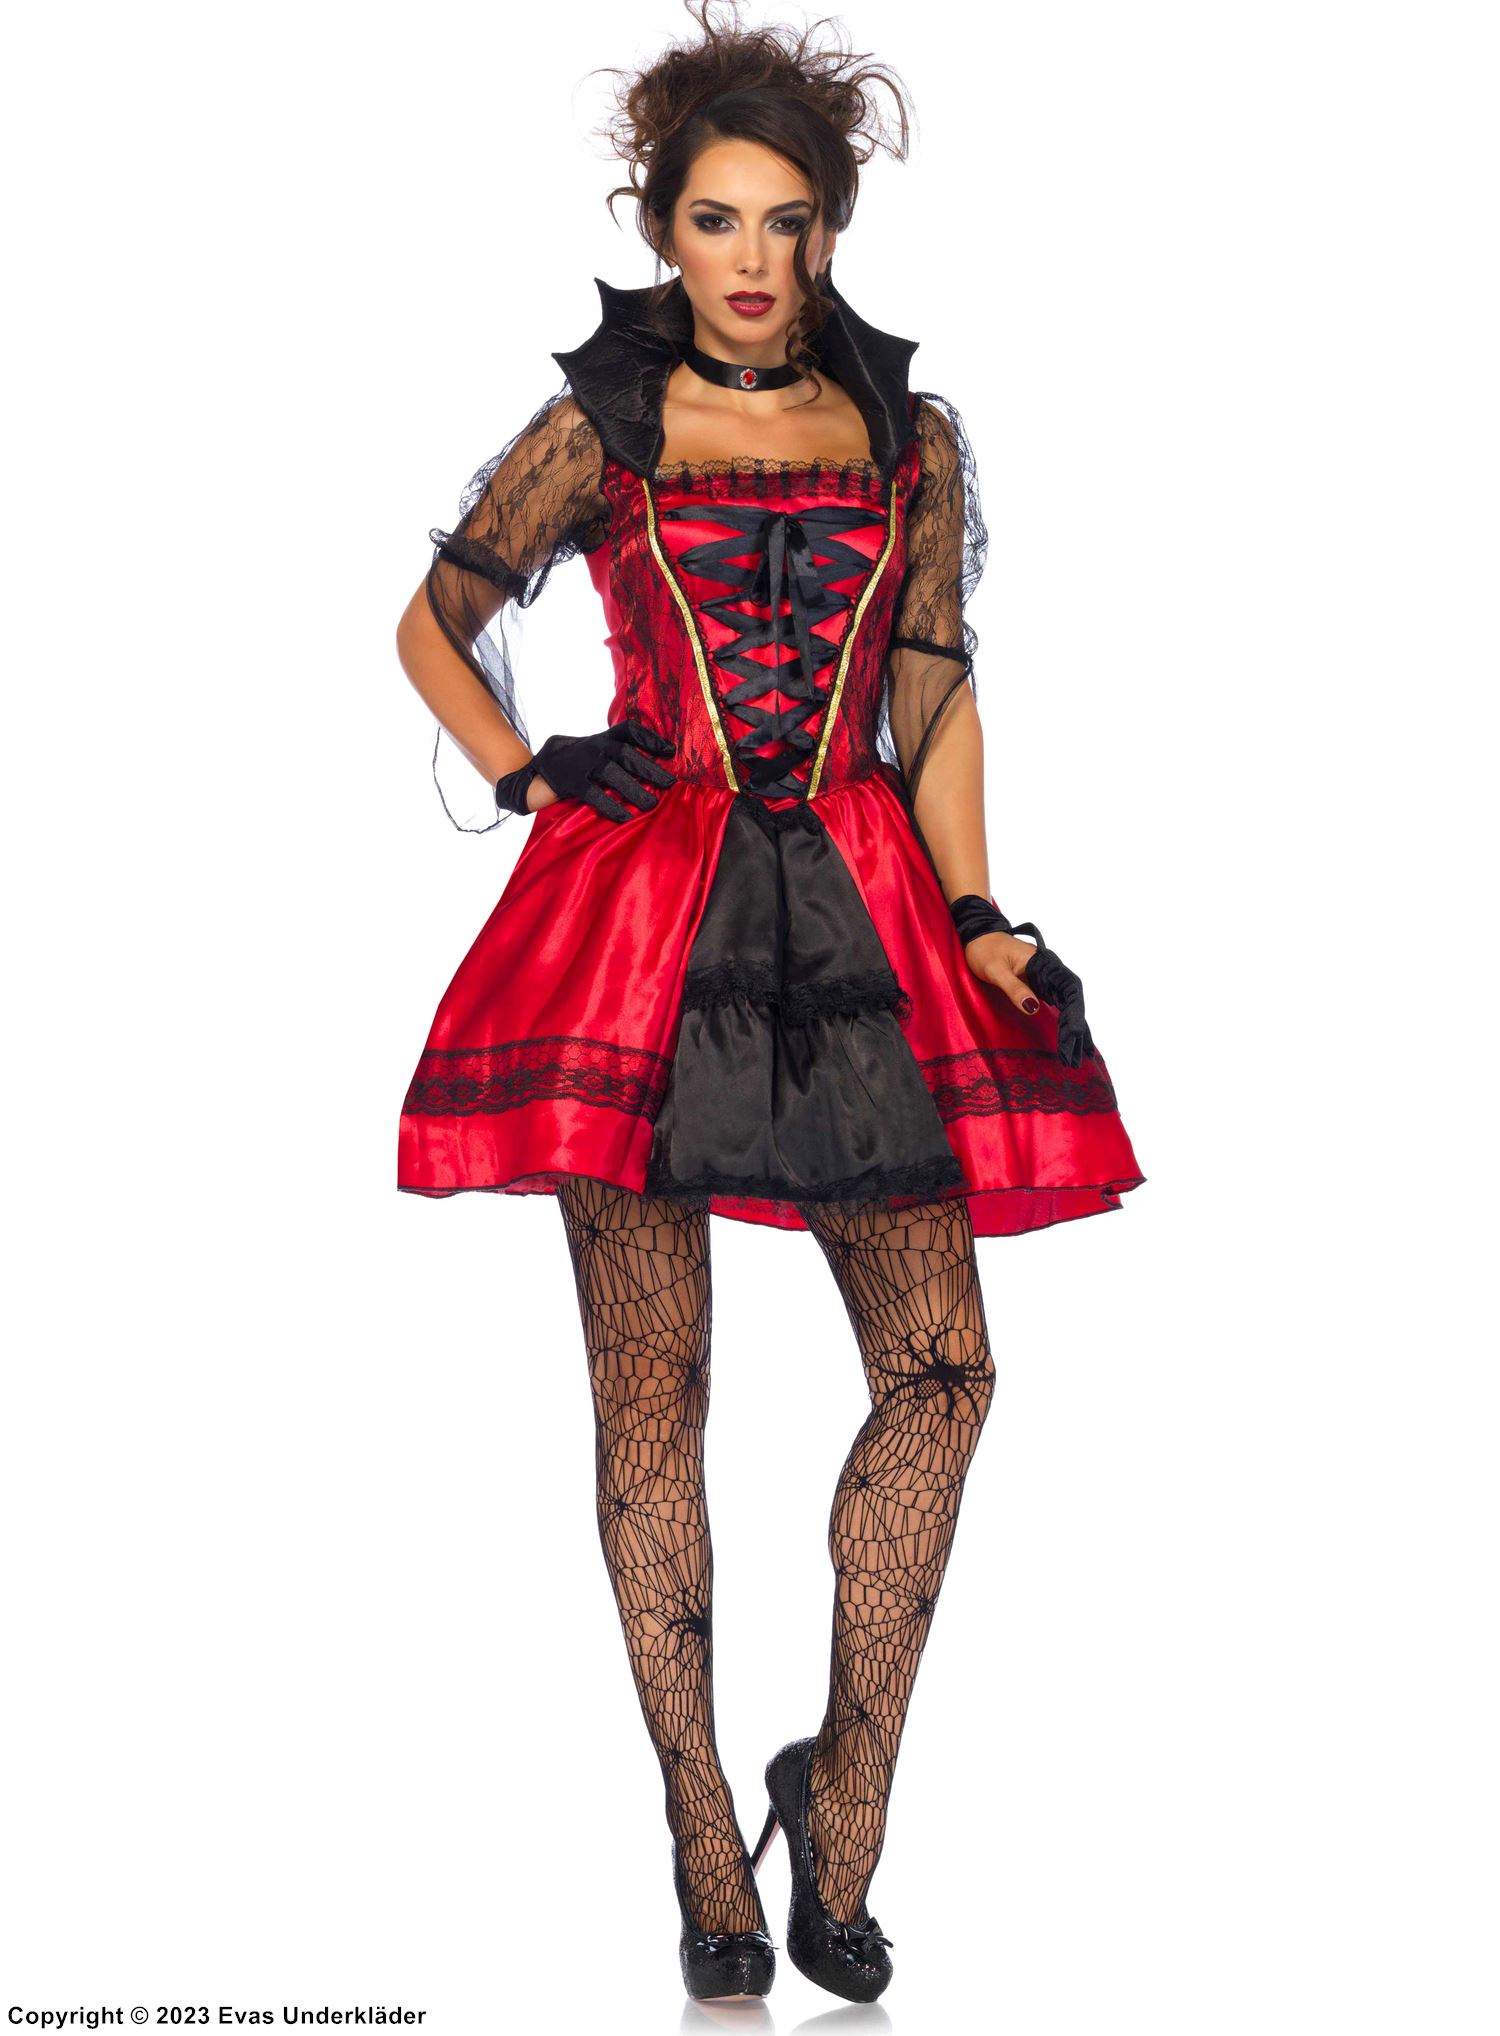 Female vampire, costume dress, lace inlays, crossing straps